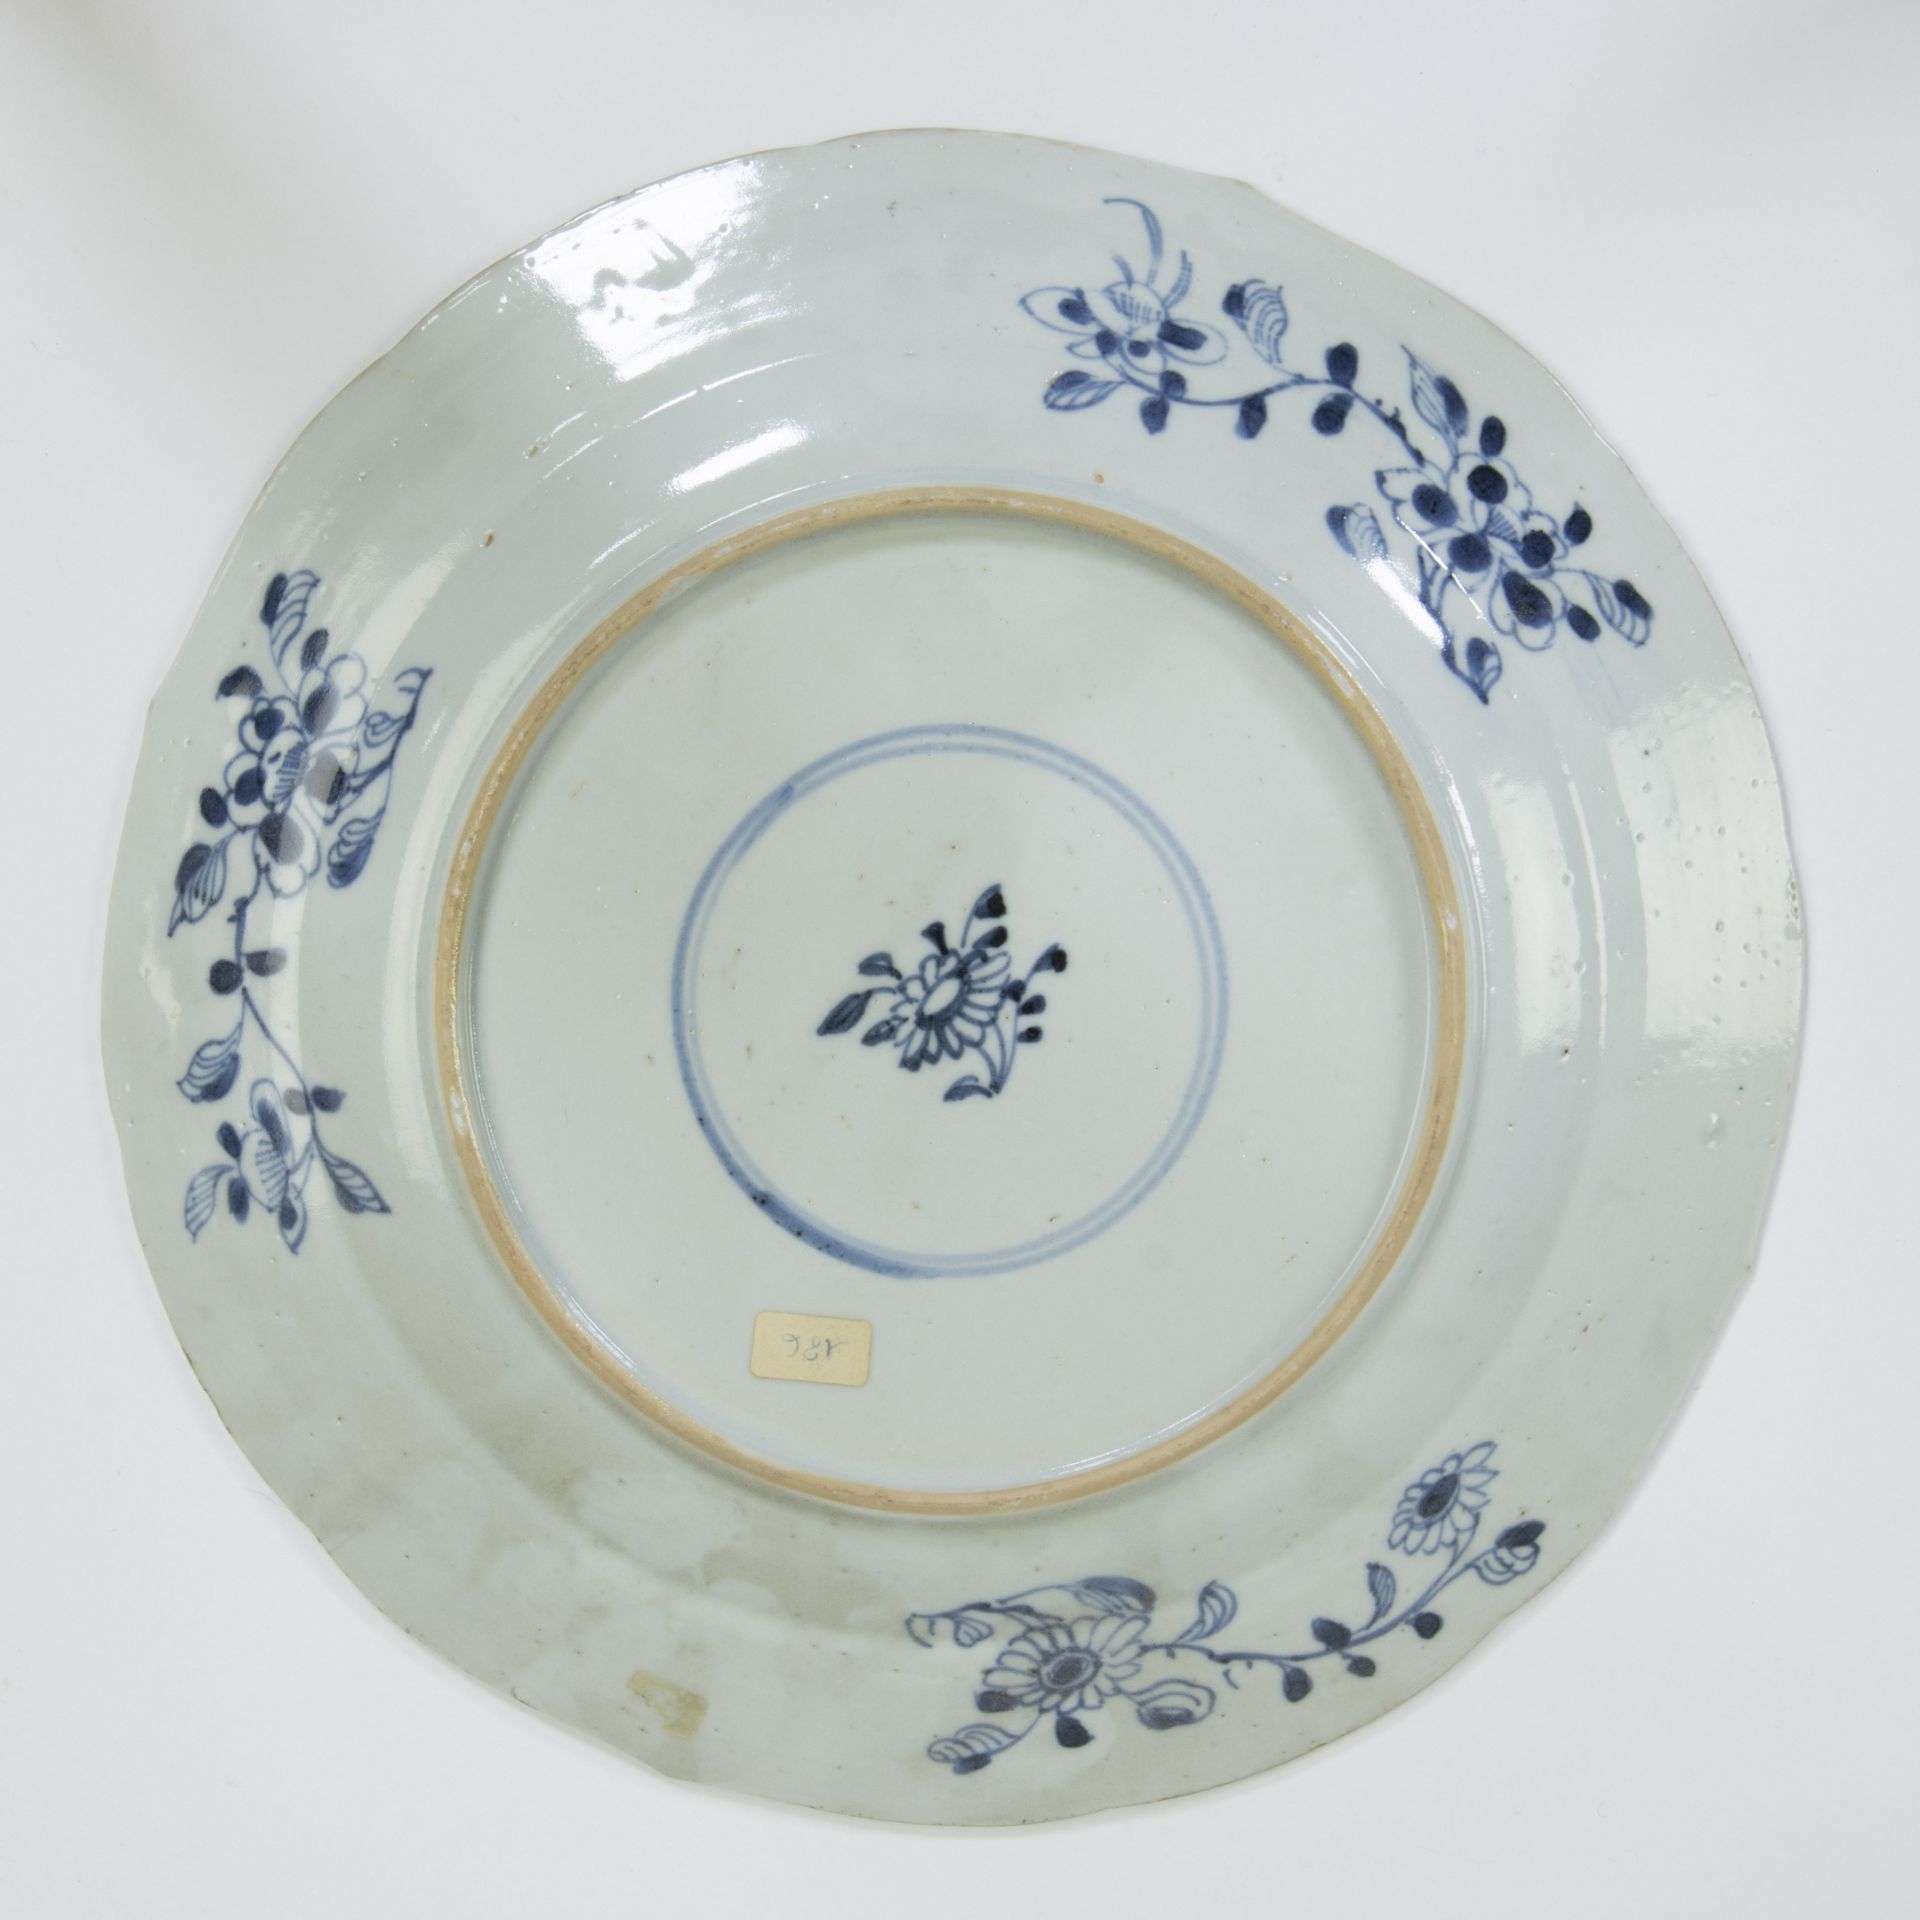 2 Chinese Imari plates and 4 blue and white plates, 18th century - Image 9 of 13